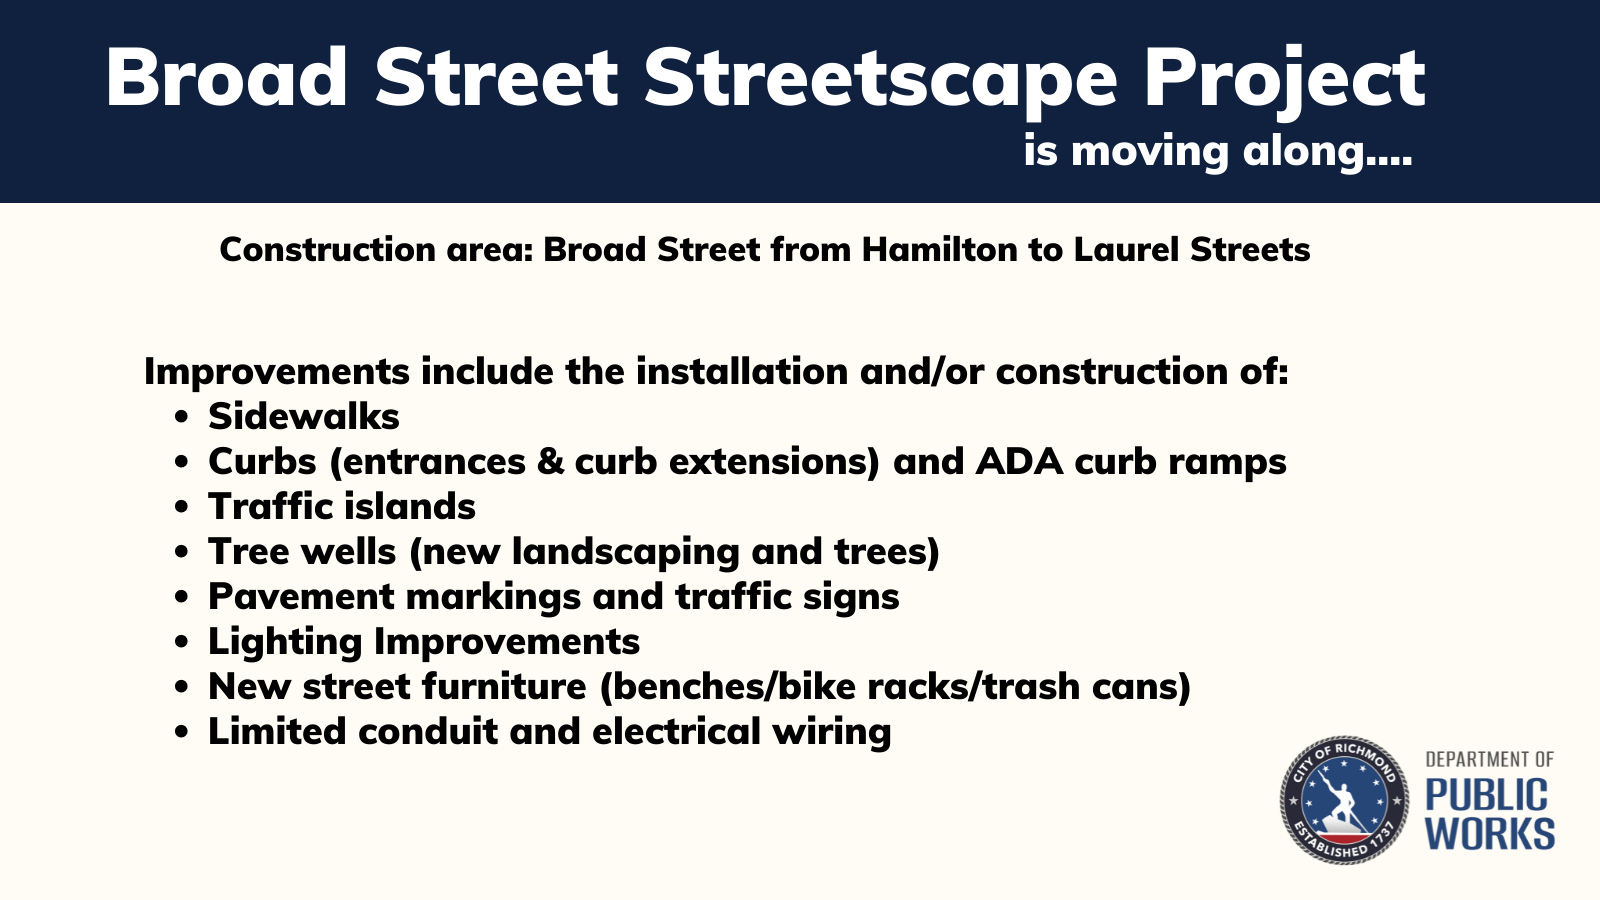 Image- Broad Street Streetscape Project Overview